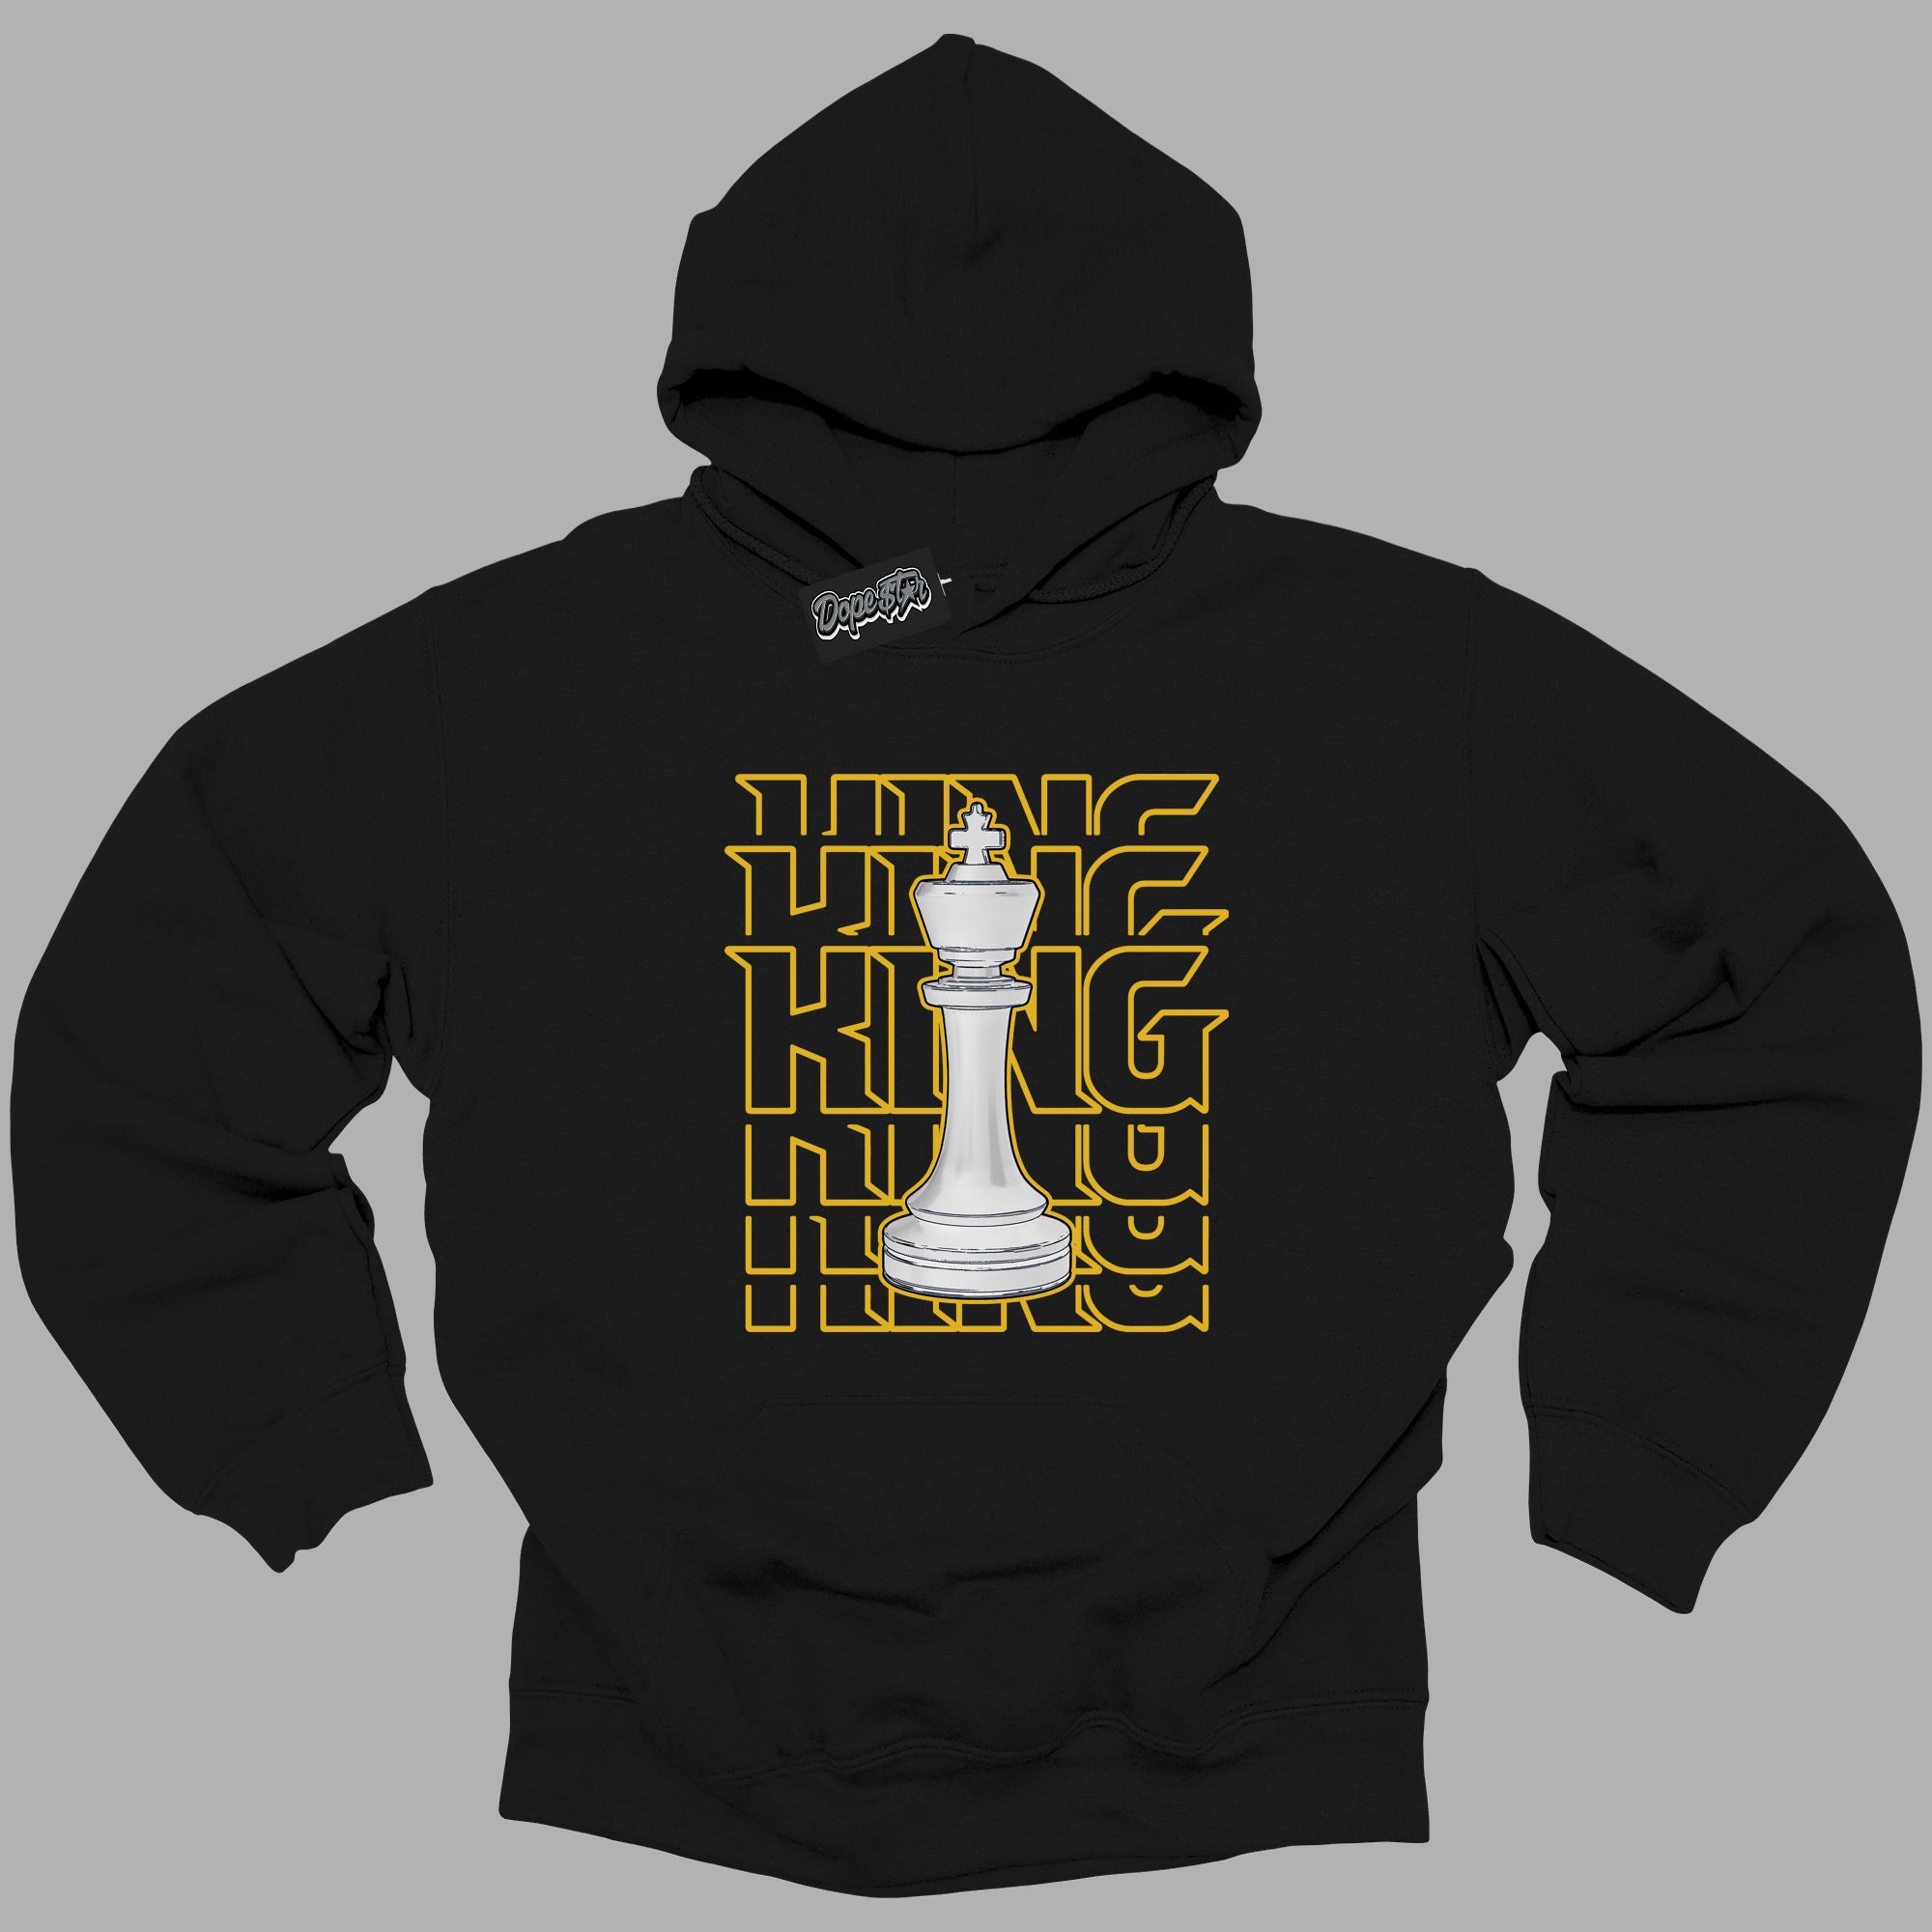 Cool Black Hoodie with “ King Chess ”  design that Perfectly Matches Yellow Ochre 6s Sneakers.